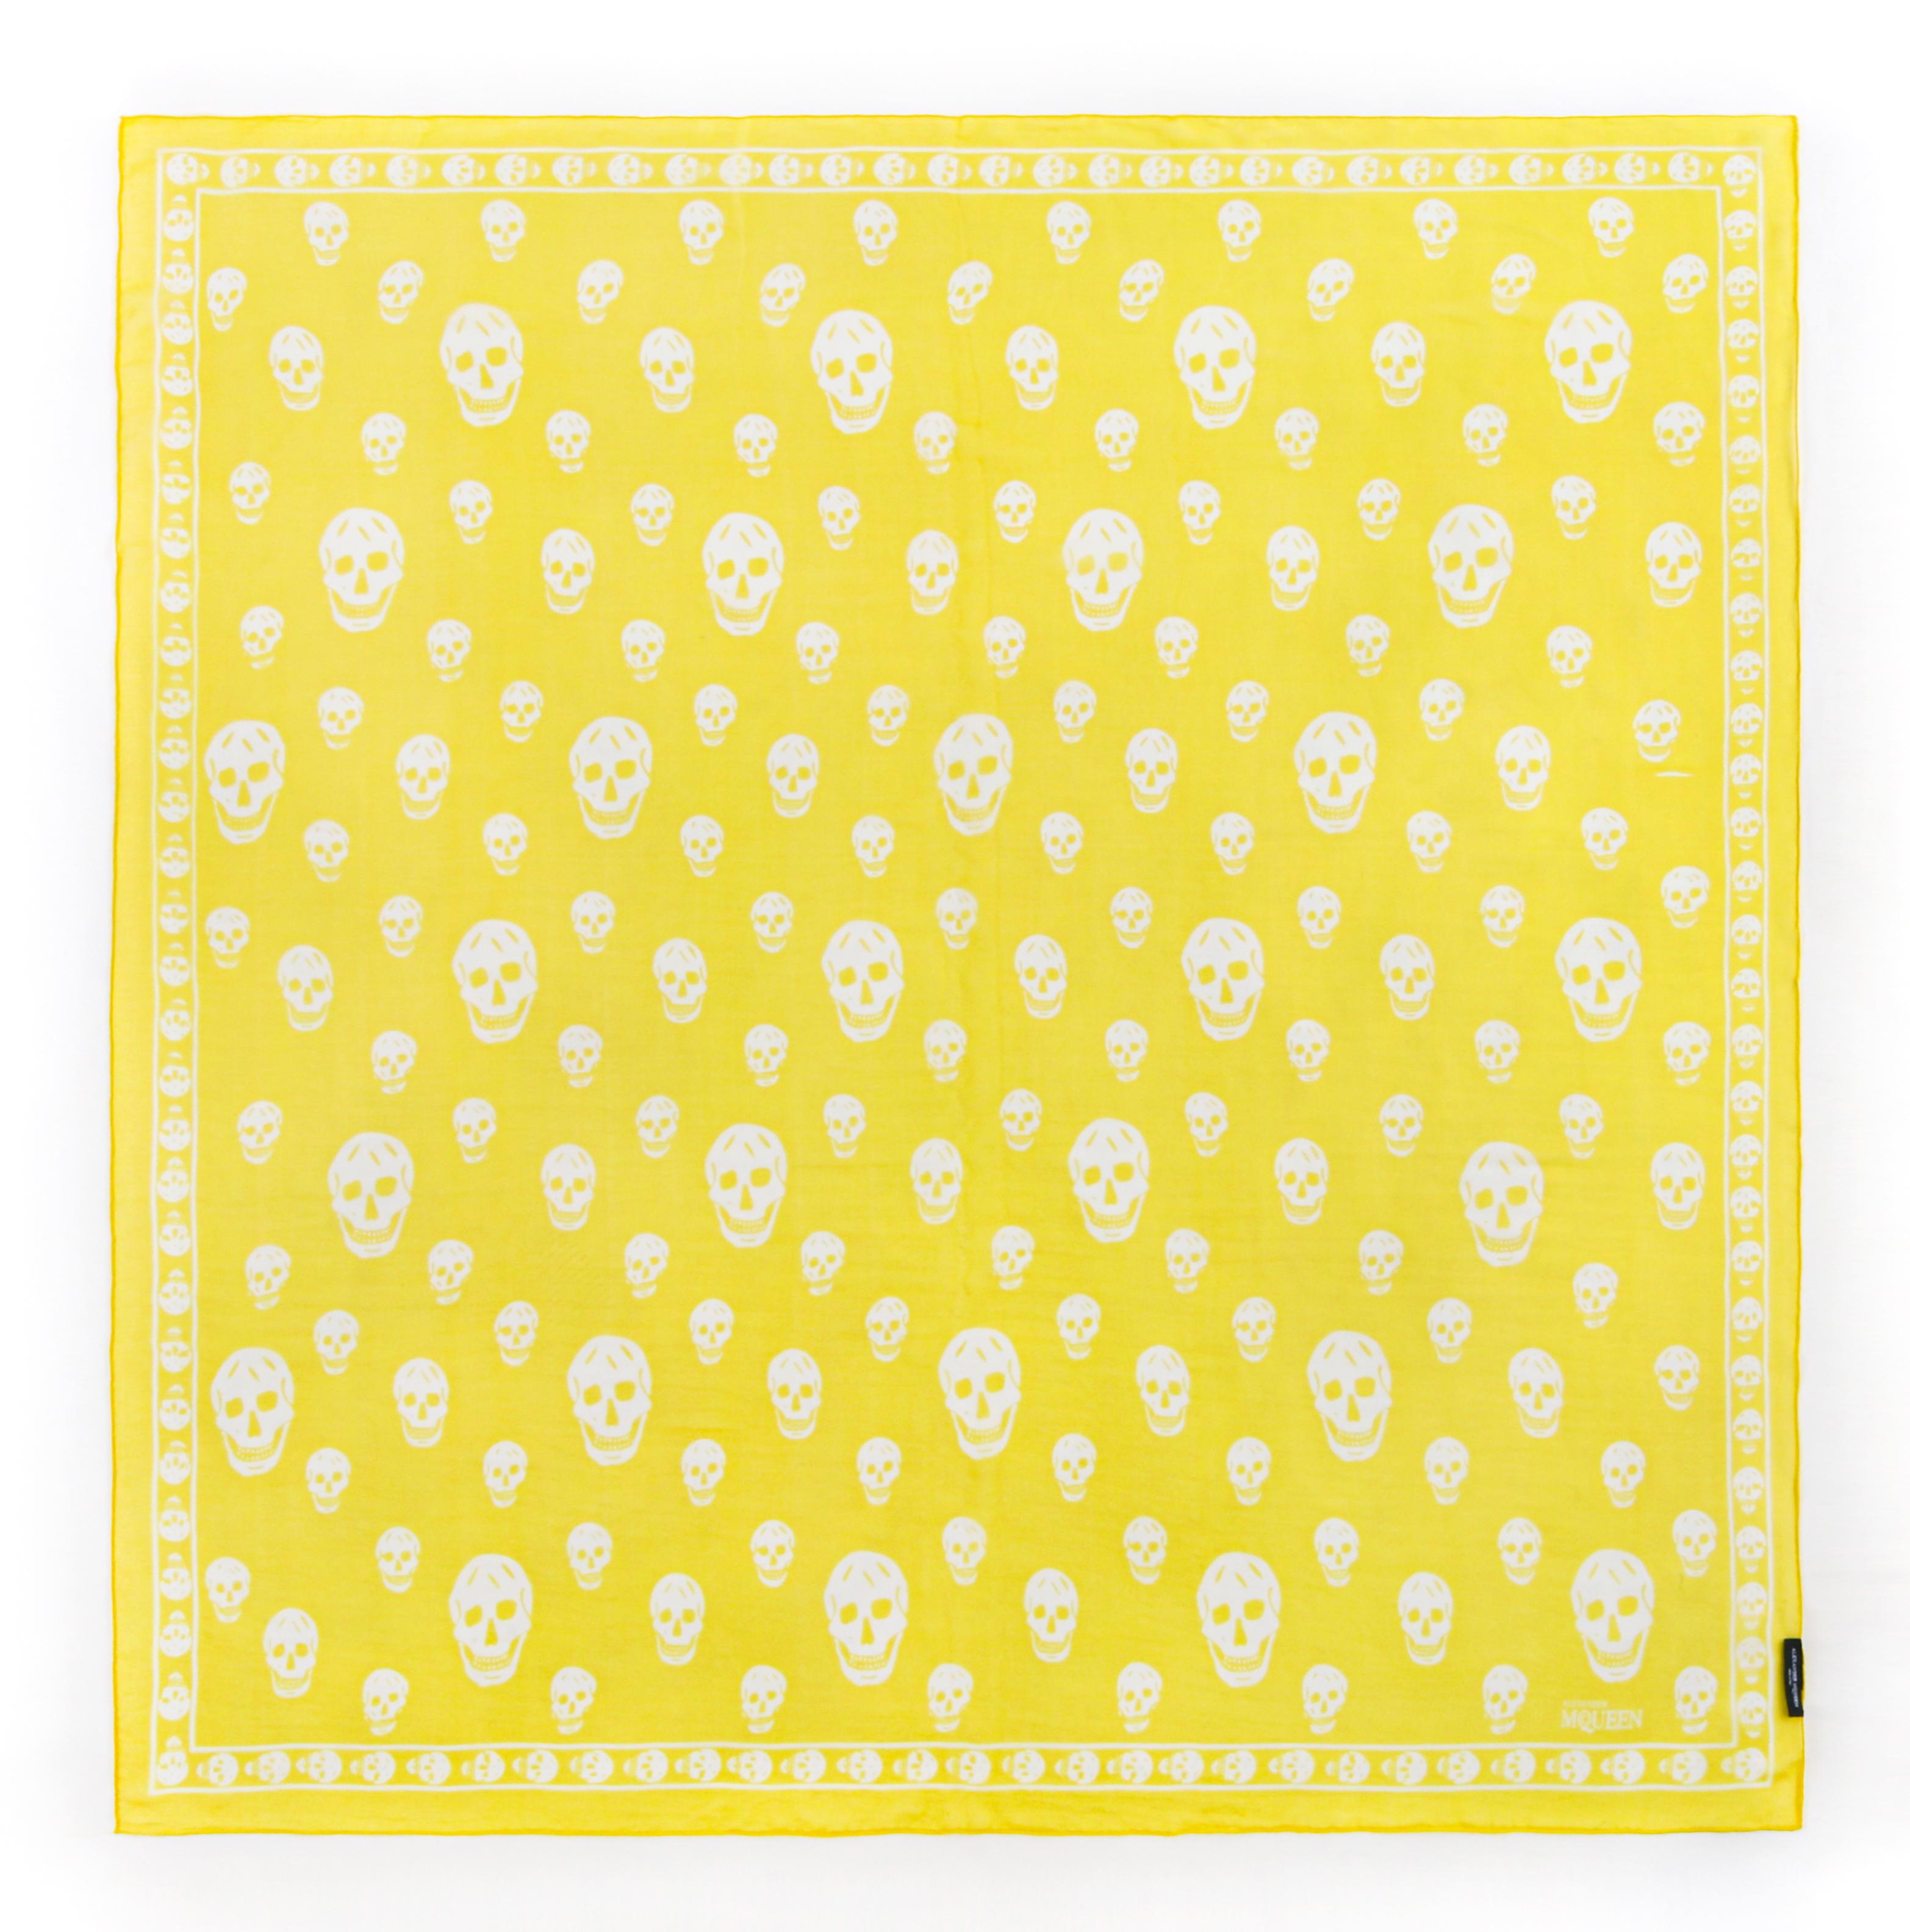 ALEXANDER McQUEEN S/S 2003 Classic Yellow White Skull Print Silk Square Scarf
Circa: 2003
Brand/Manufacturer: Alexander McQueen
Designer: Alexander McQueen
Style: Square scarf
Color(s): Shades of yellow and white
Lined: No
Marked Fabric Content: